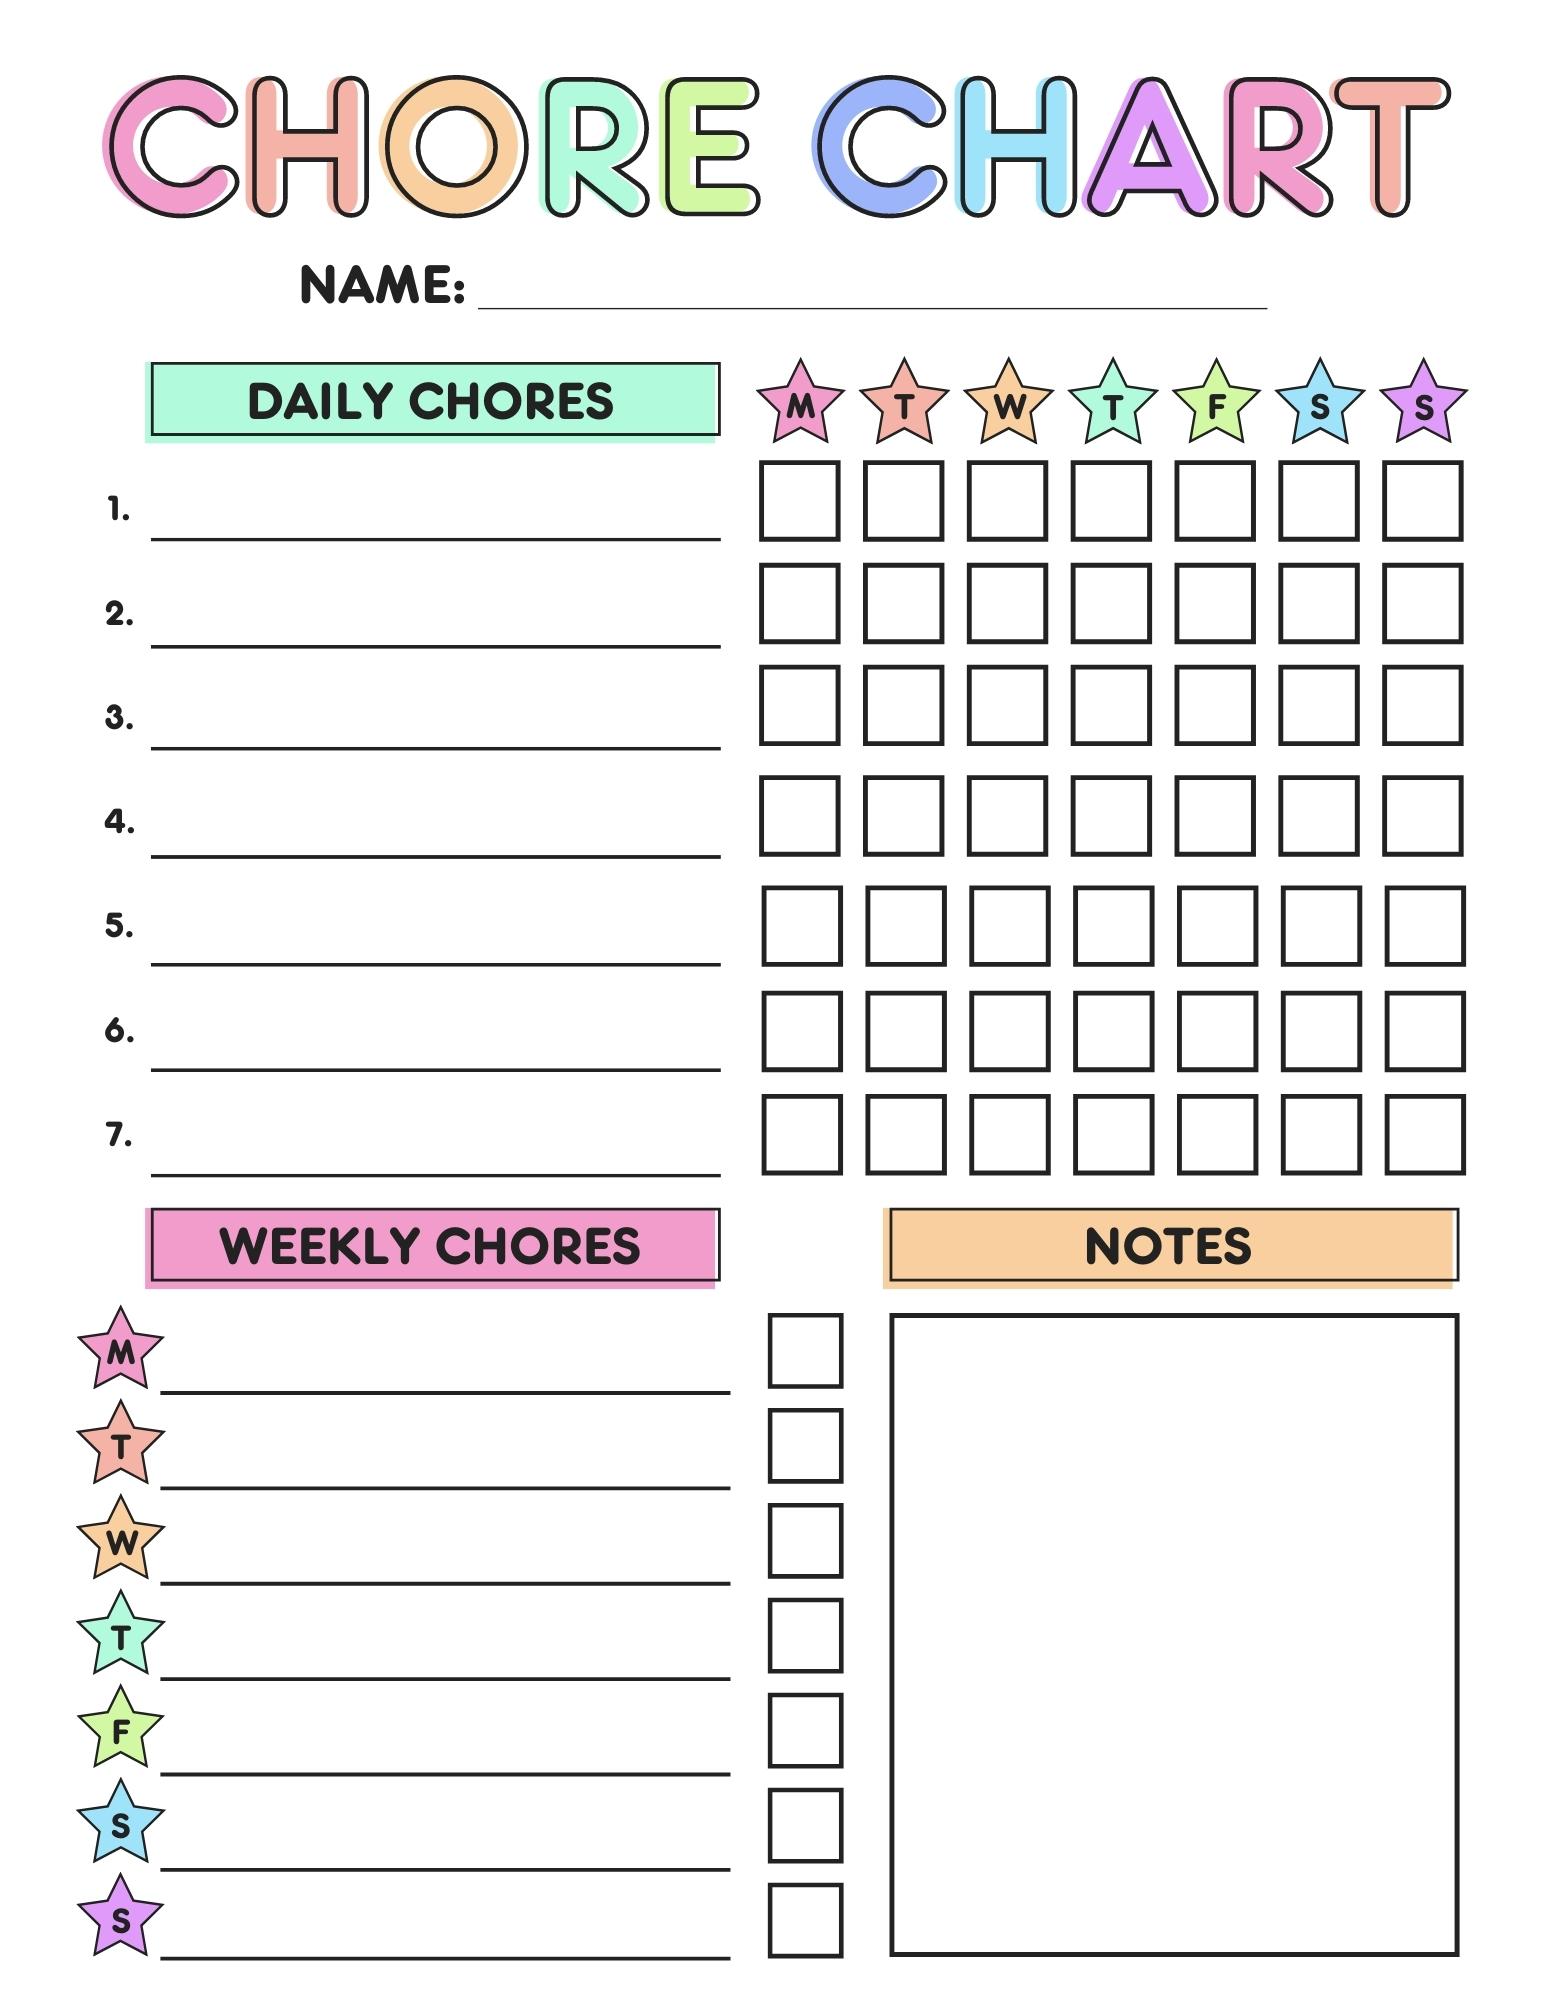 Free Printable Chore Charts for Kids - Pretty Sweet